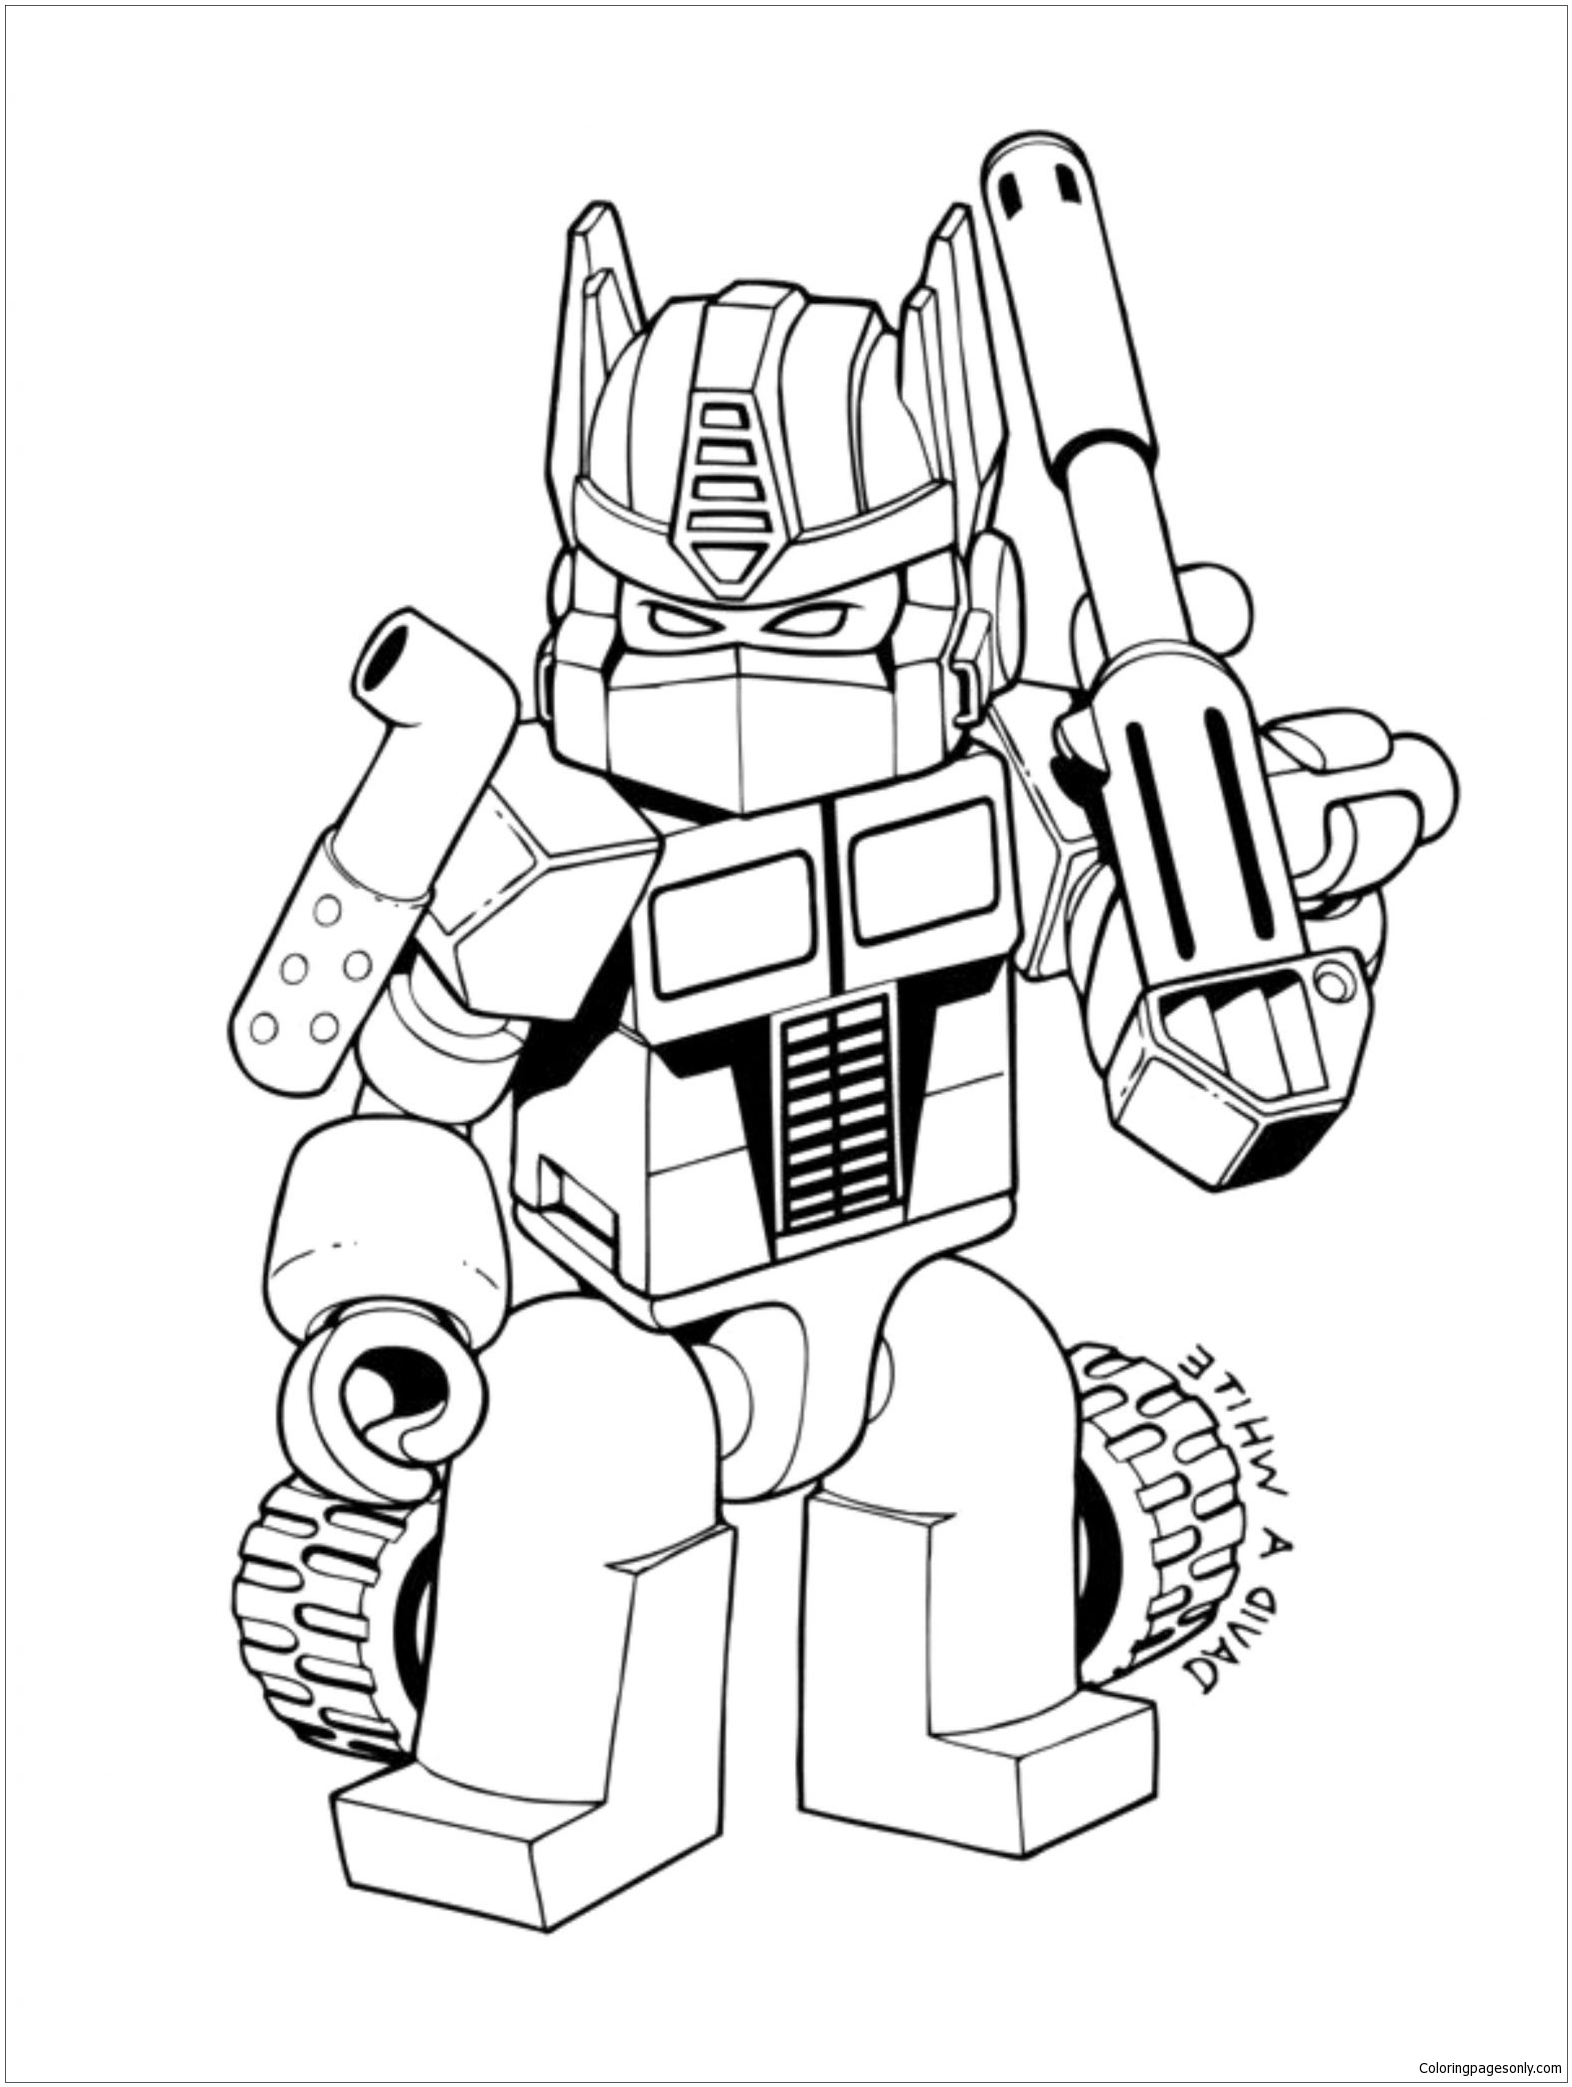 Lego Transformers Coloring Page - Free Coloring Pages Online